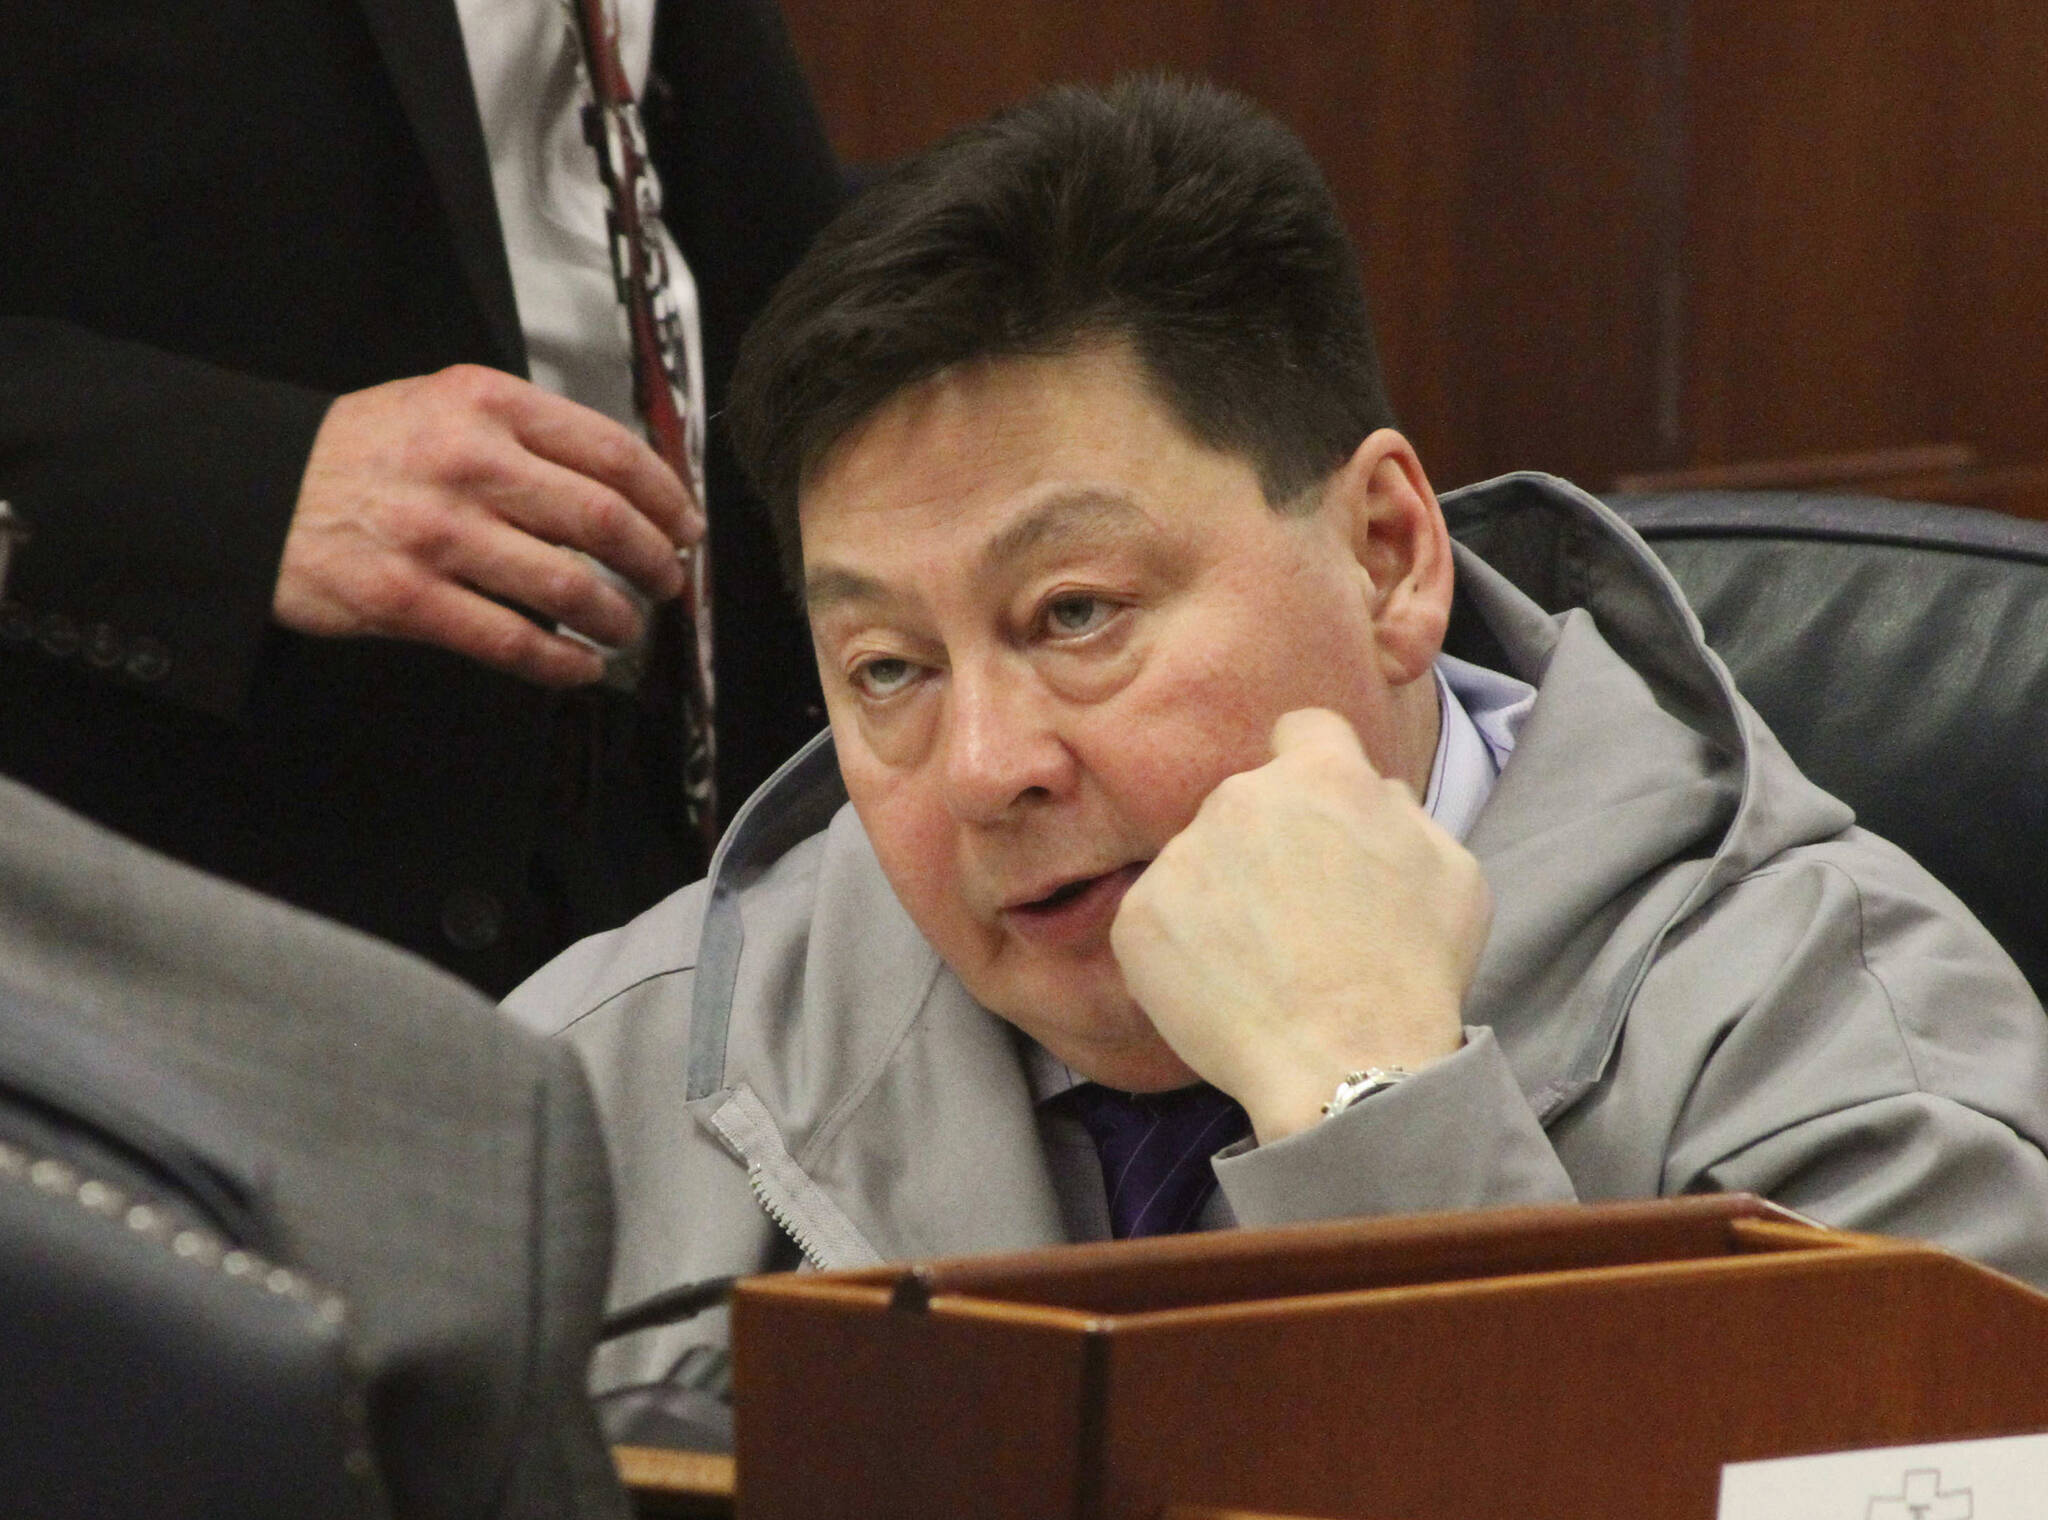 In this Jan. 17, 2017, photo state Rep. Dean Westlake, D-Kotzebue, talks with another legislator during a break in the opening session of the Alaska Legislature in Juneau, Alaska. The son of the former Alaska lawmaker faces charges of manslaughter and evidence tampering in death of his father, according to charging documents. Tallon Westlake was arrested over the weekend. An online court records system did not show an attorney Monday, Aug. 22, 2022 who could speak on his behalf. The charging documents are dated Sunday. (AP File Photo / Mark Thiessen)